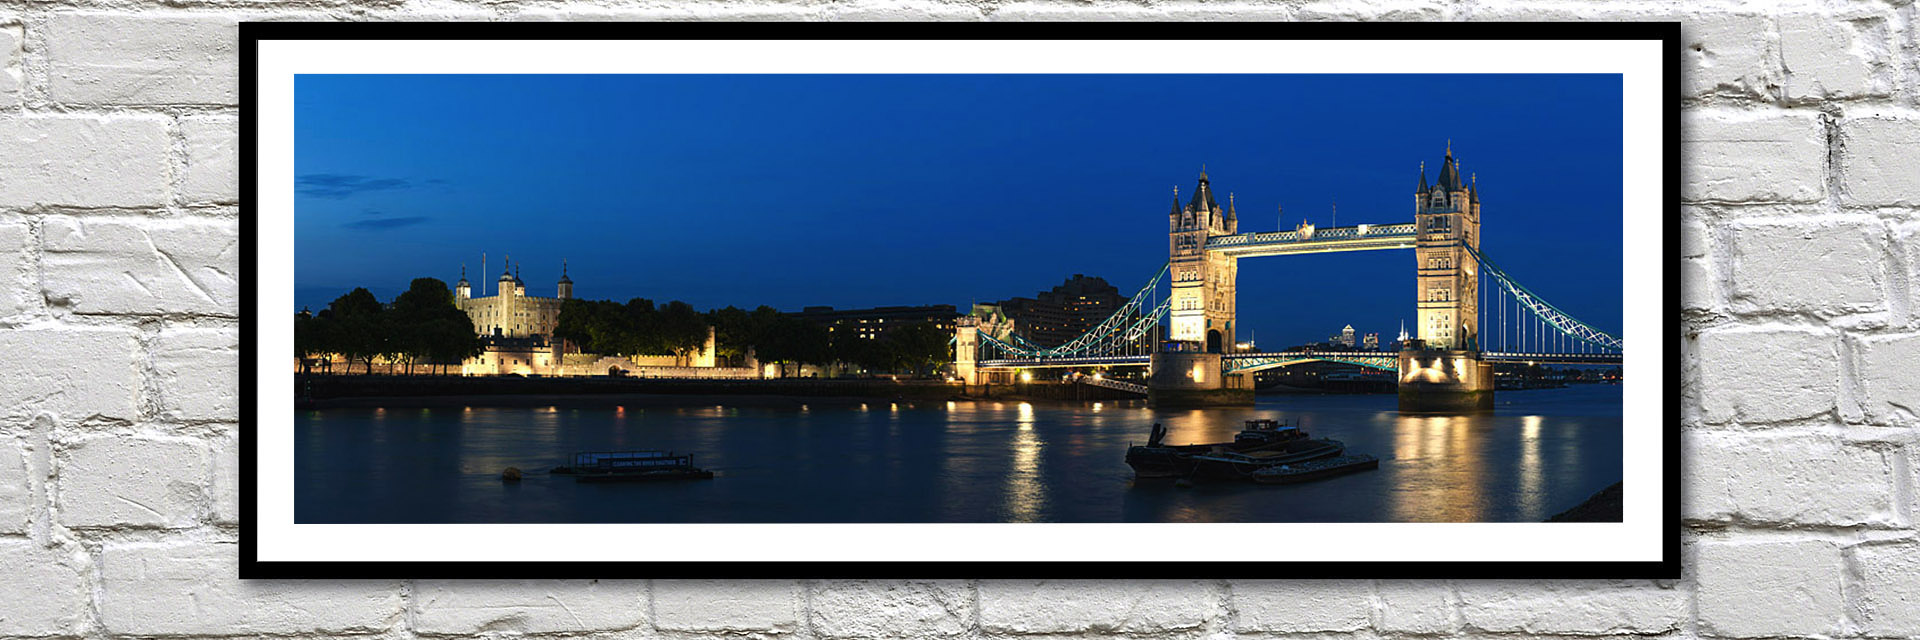 Office art ideas - prints of the bridges which cross the River Thames in London